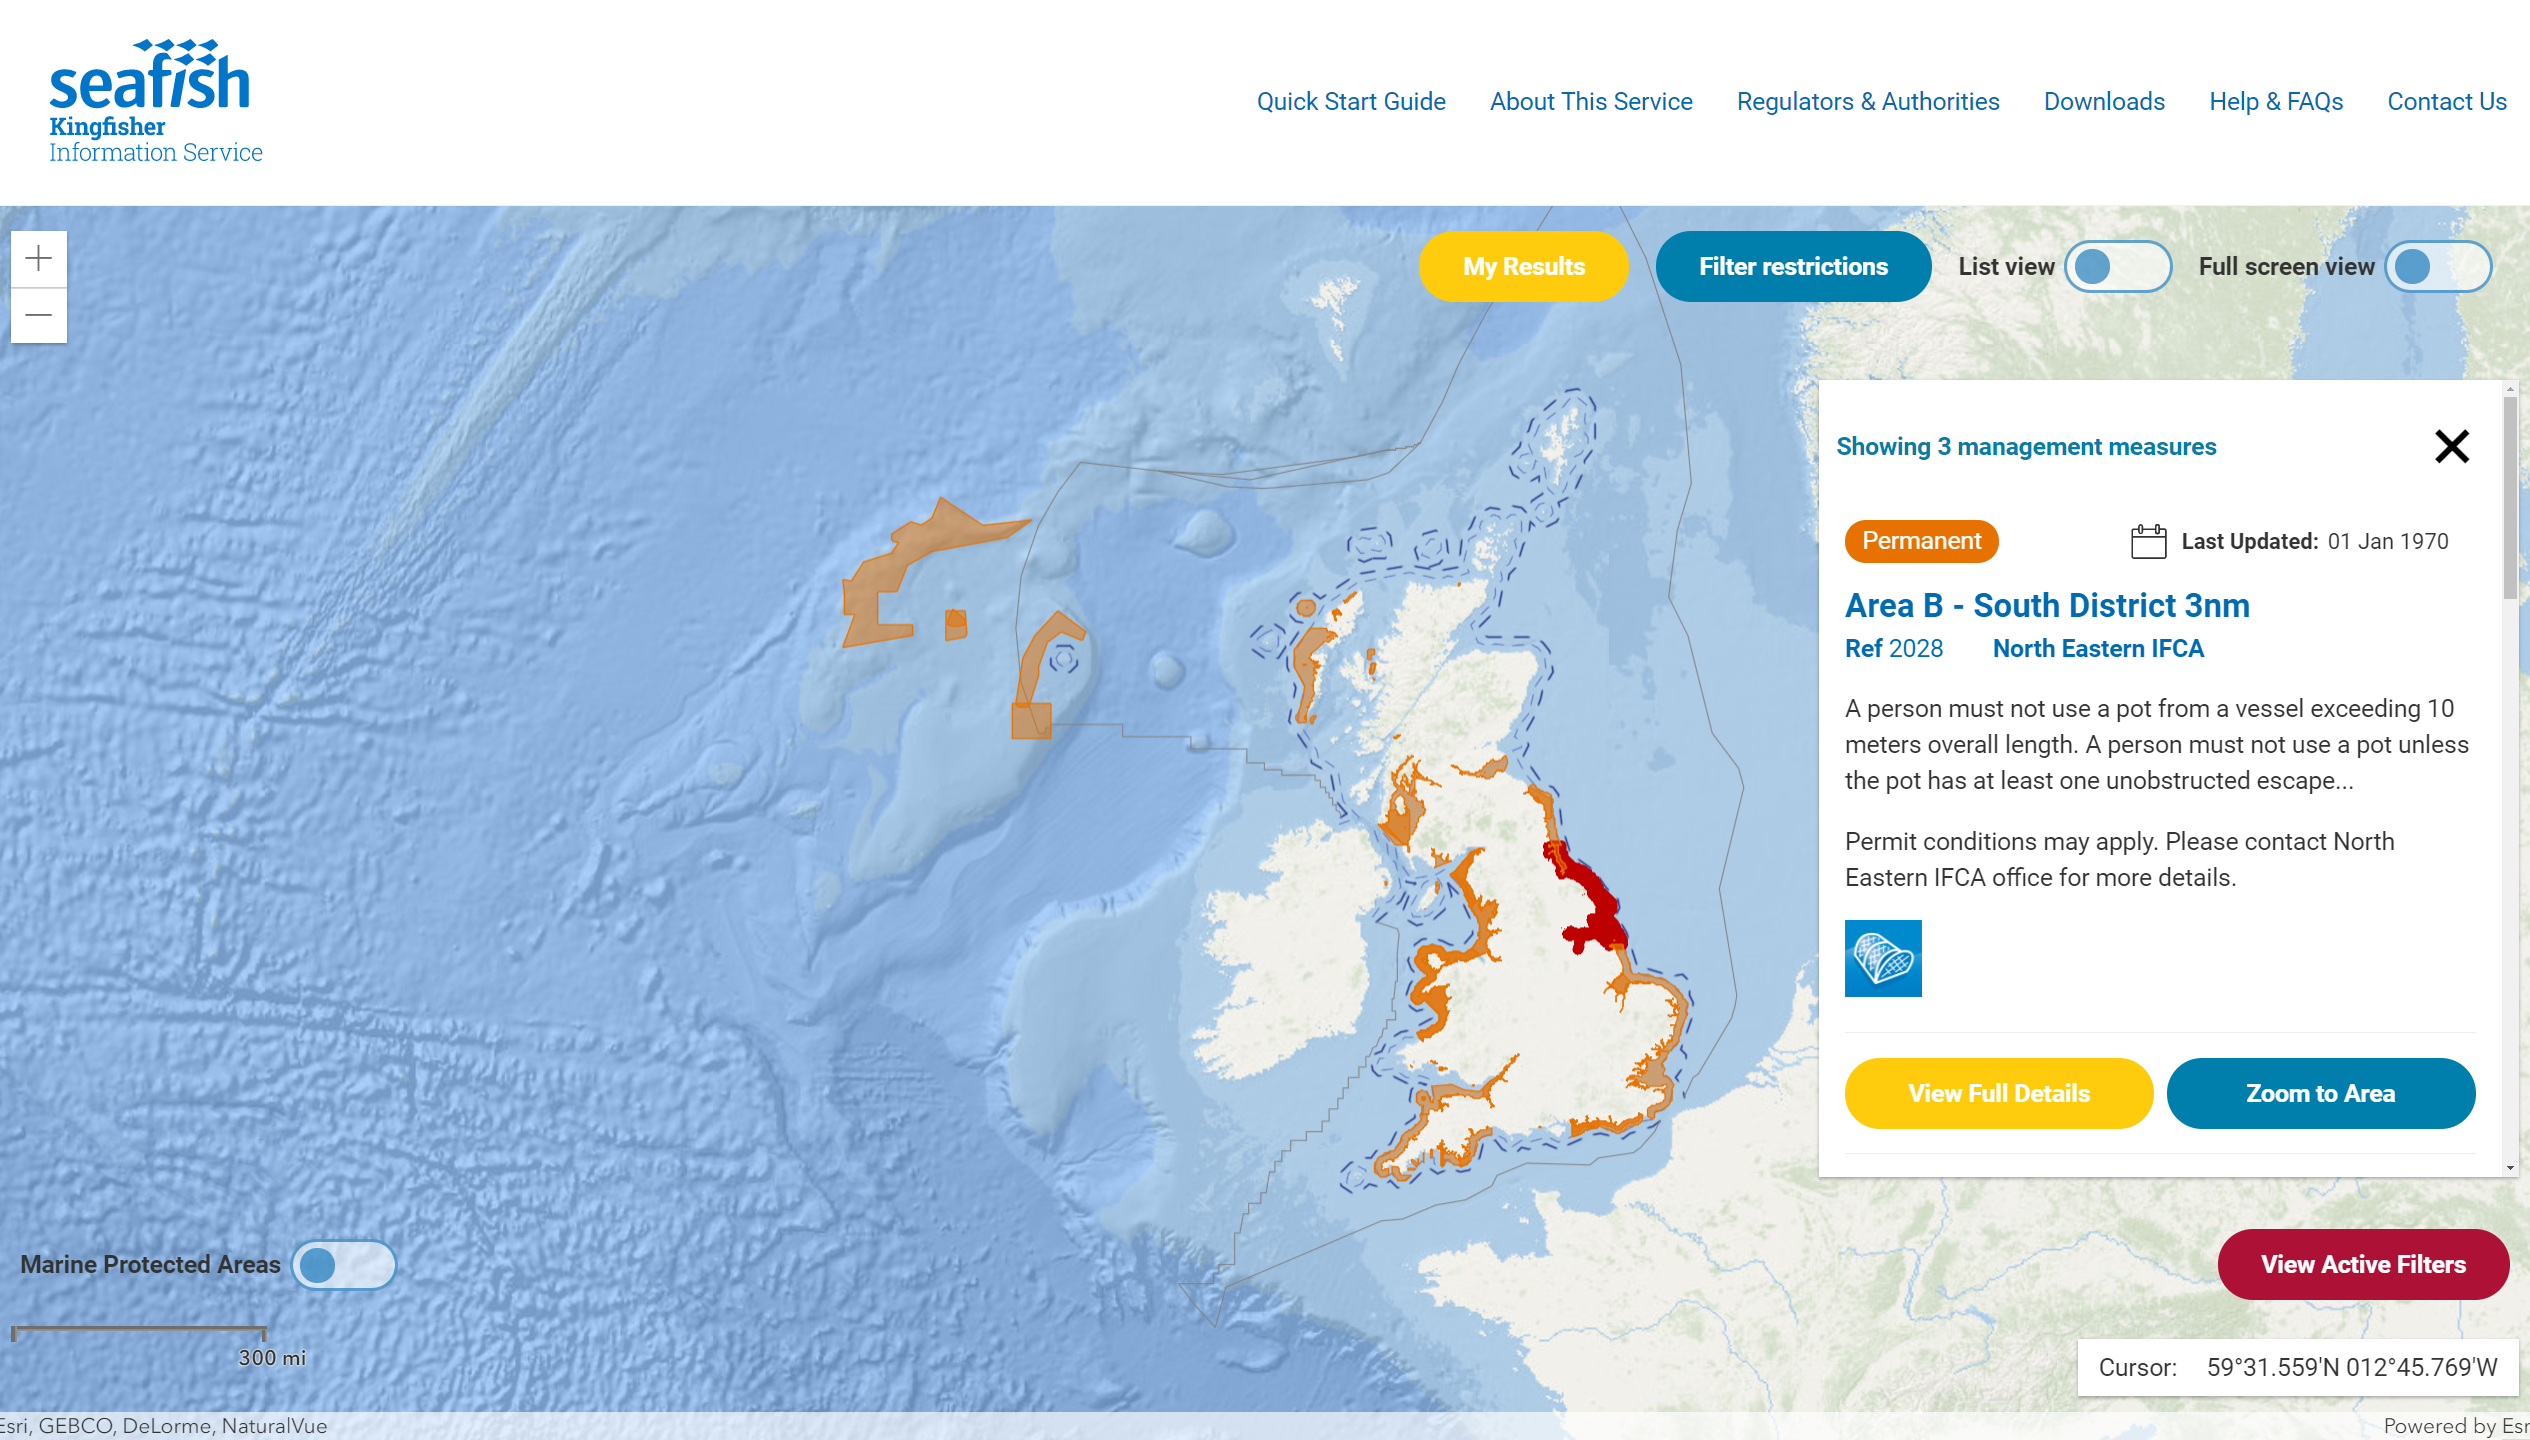 Screenshot showing map with details of fishing gear restriction on Kingfisher fishing restrictions website